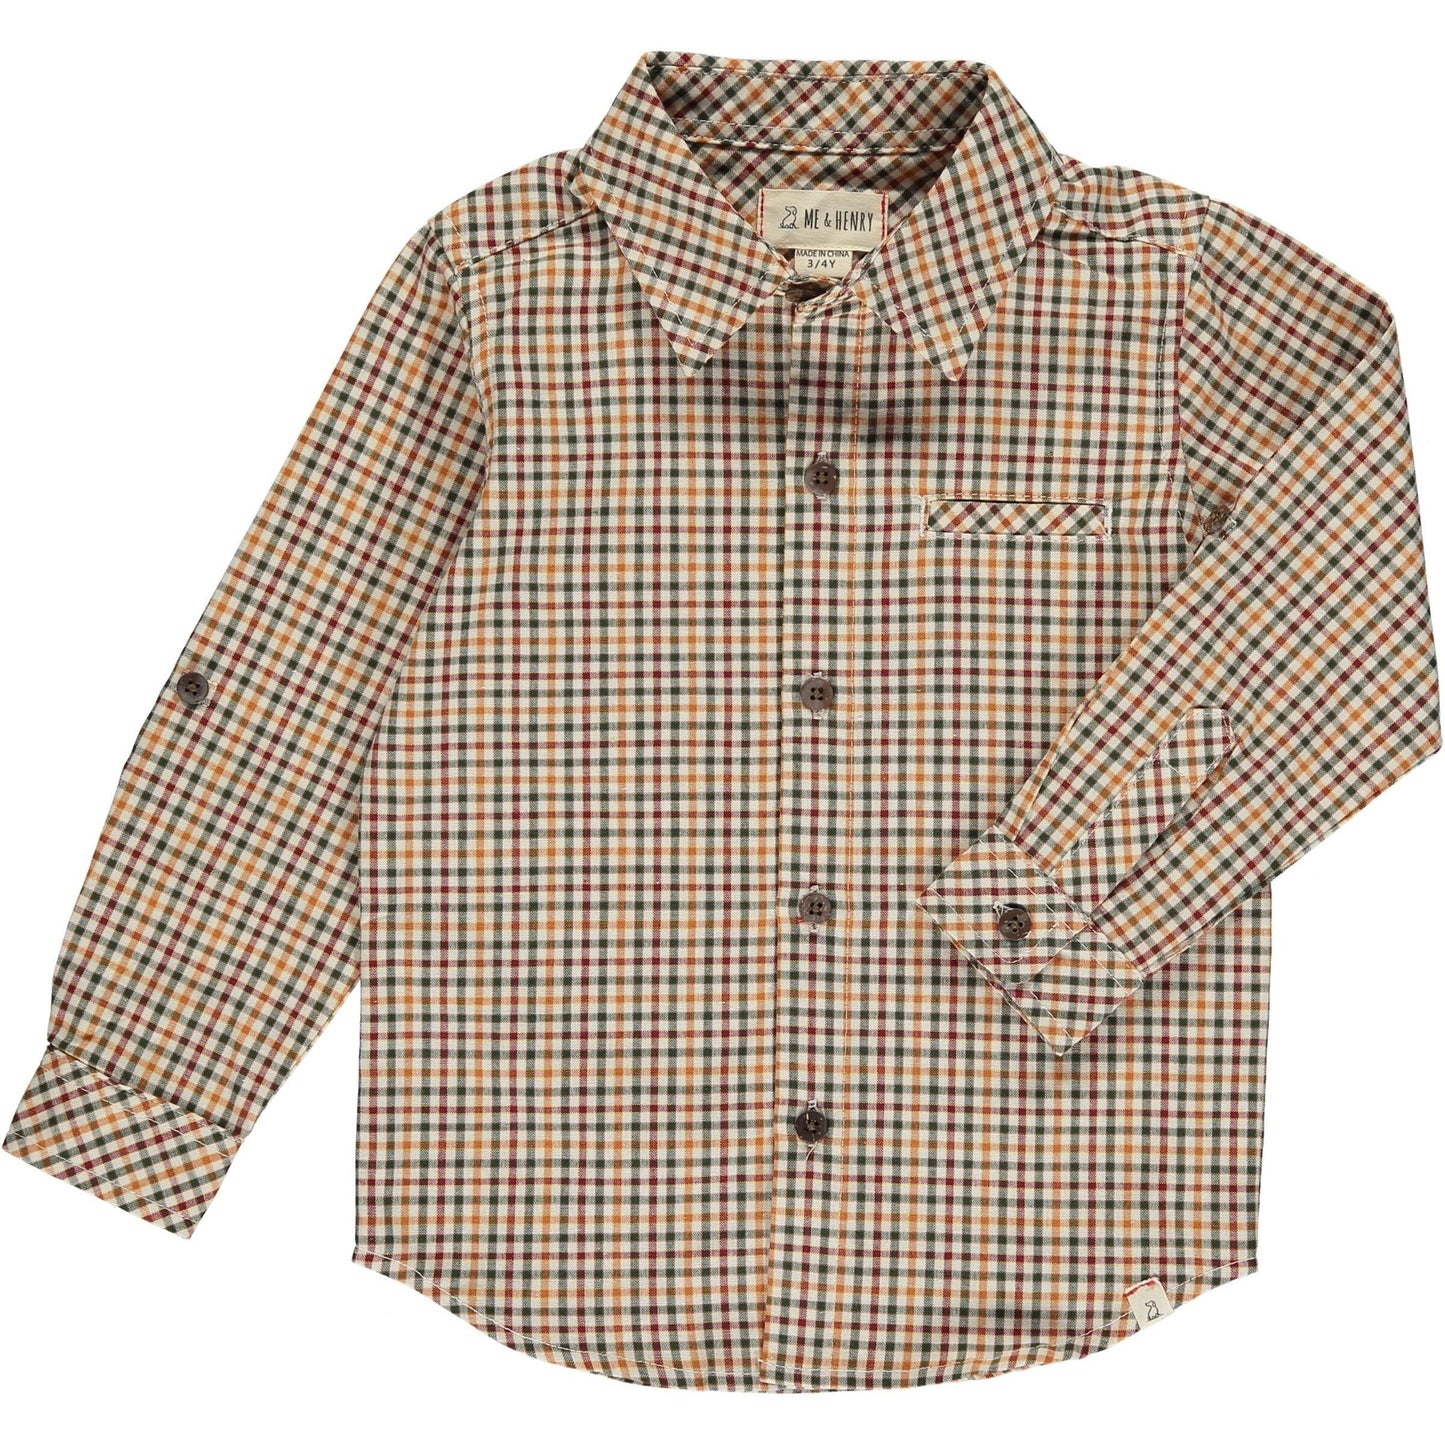 Atwood Plaid Woven Shirt in Navy/Gold